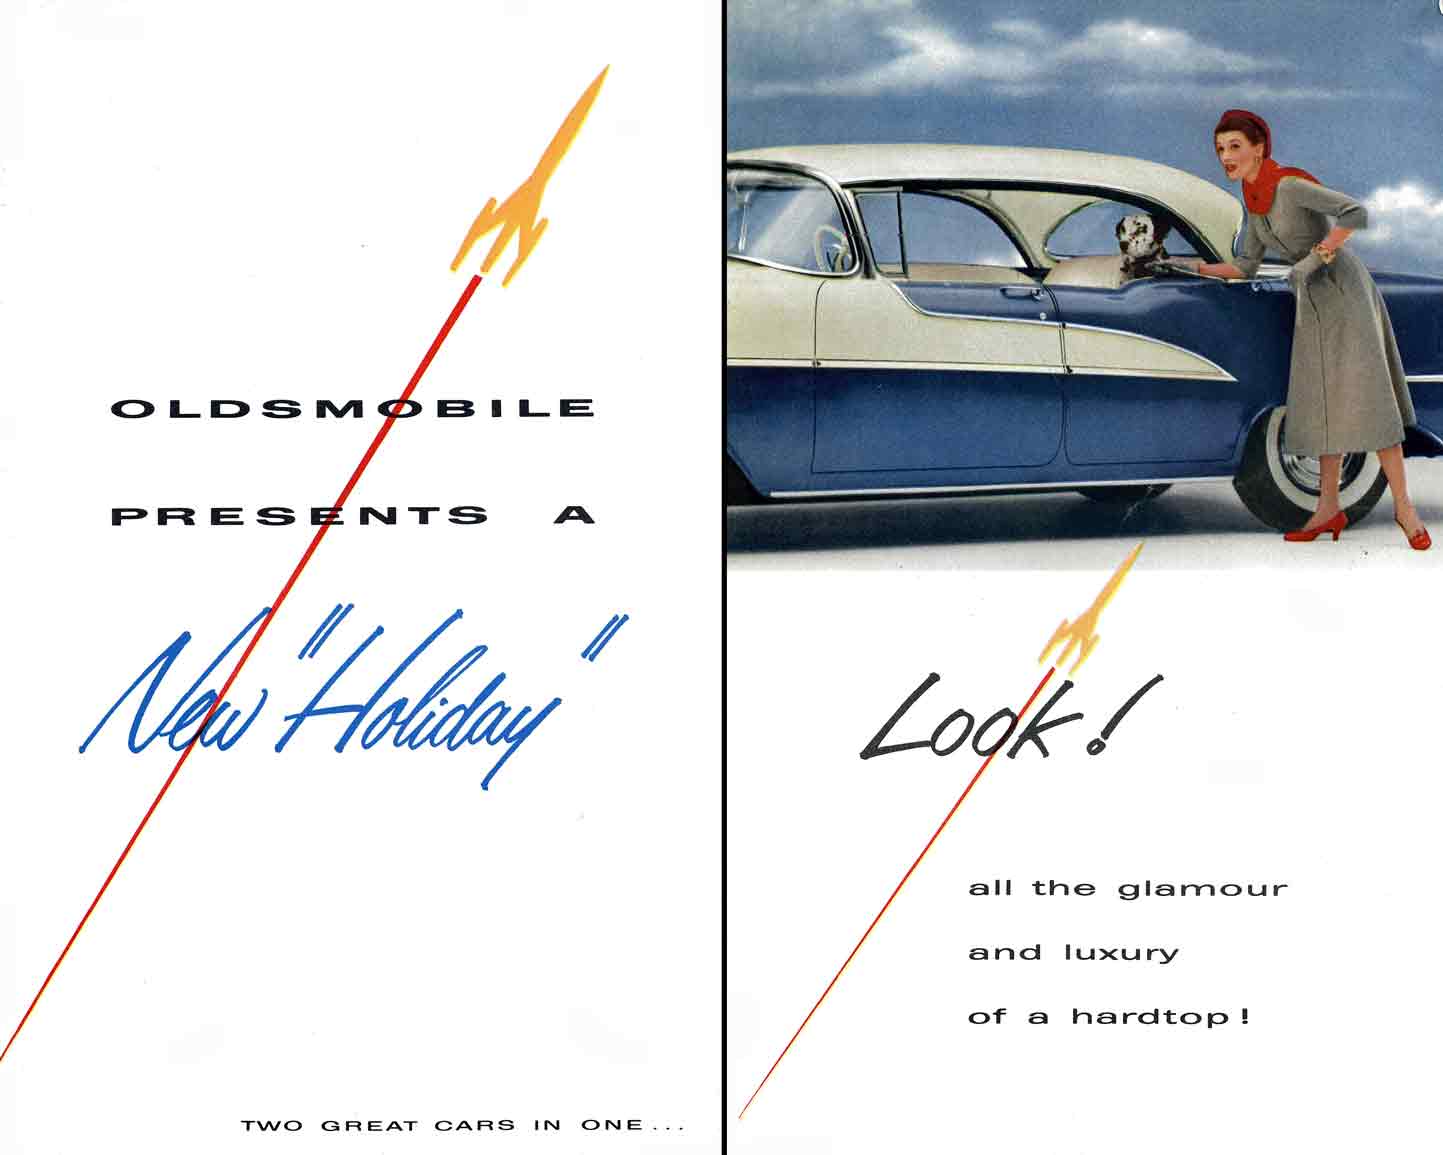 Oldsmobile 1955 - Oldsmobile Presents a New Holiday - Two Great Cars in One